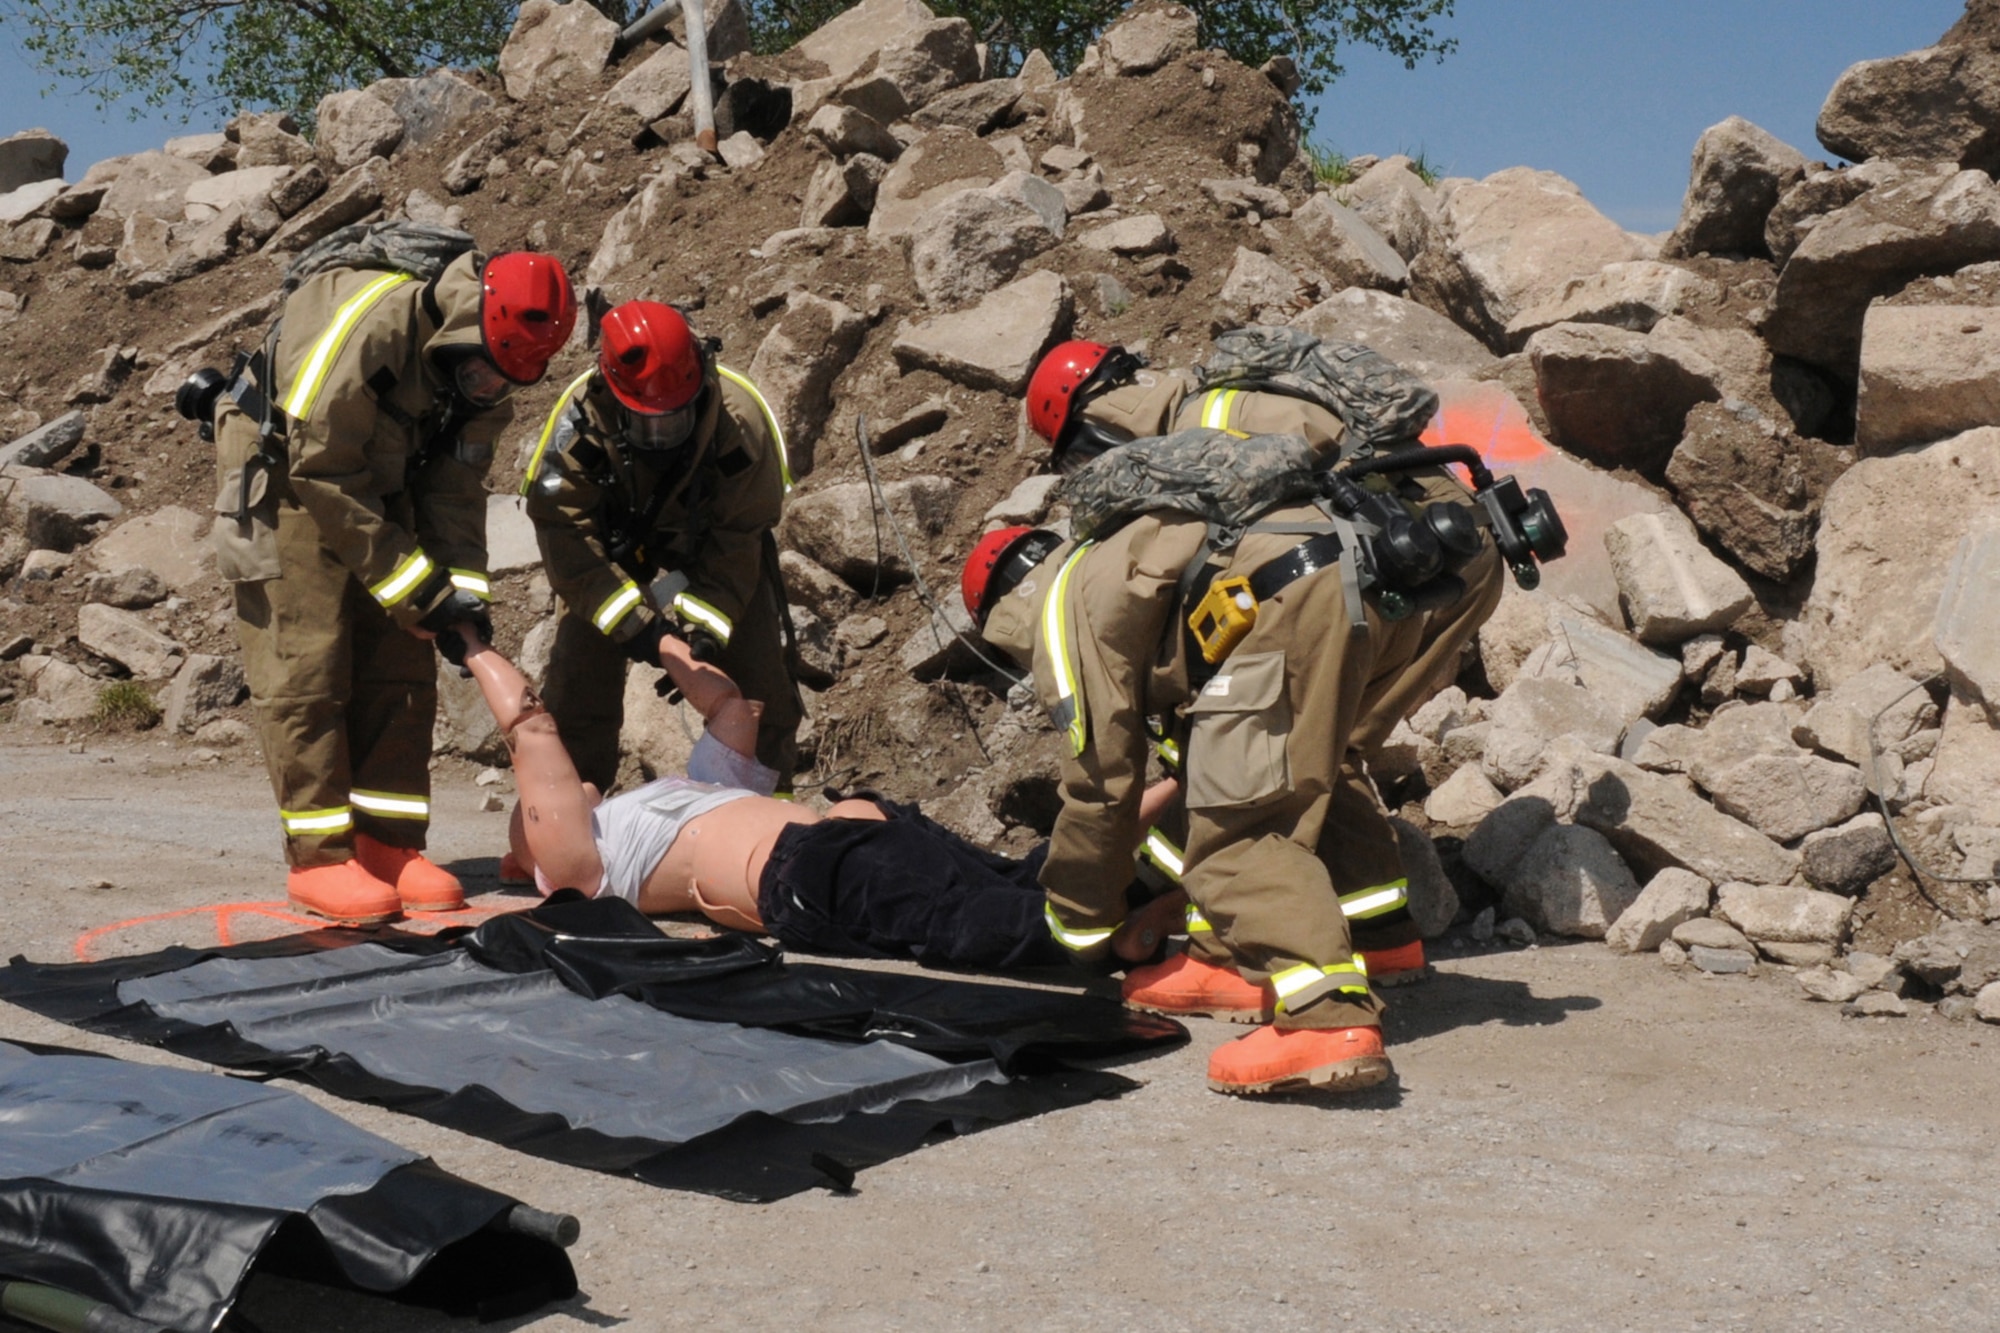 The FSRT team loads a 200 pound mannequin onto a litter to be removed from the "hot zone" at Camp Ashland, Nebraska on May 17, 2013. Mannequins are used to represent casualties to make the scenario as realistic as possible for the team.  (U.S. Air National Guard photo by Tech. Sgt. Sara M. Robinson/Released)